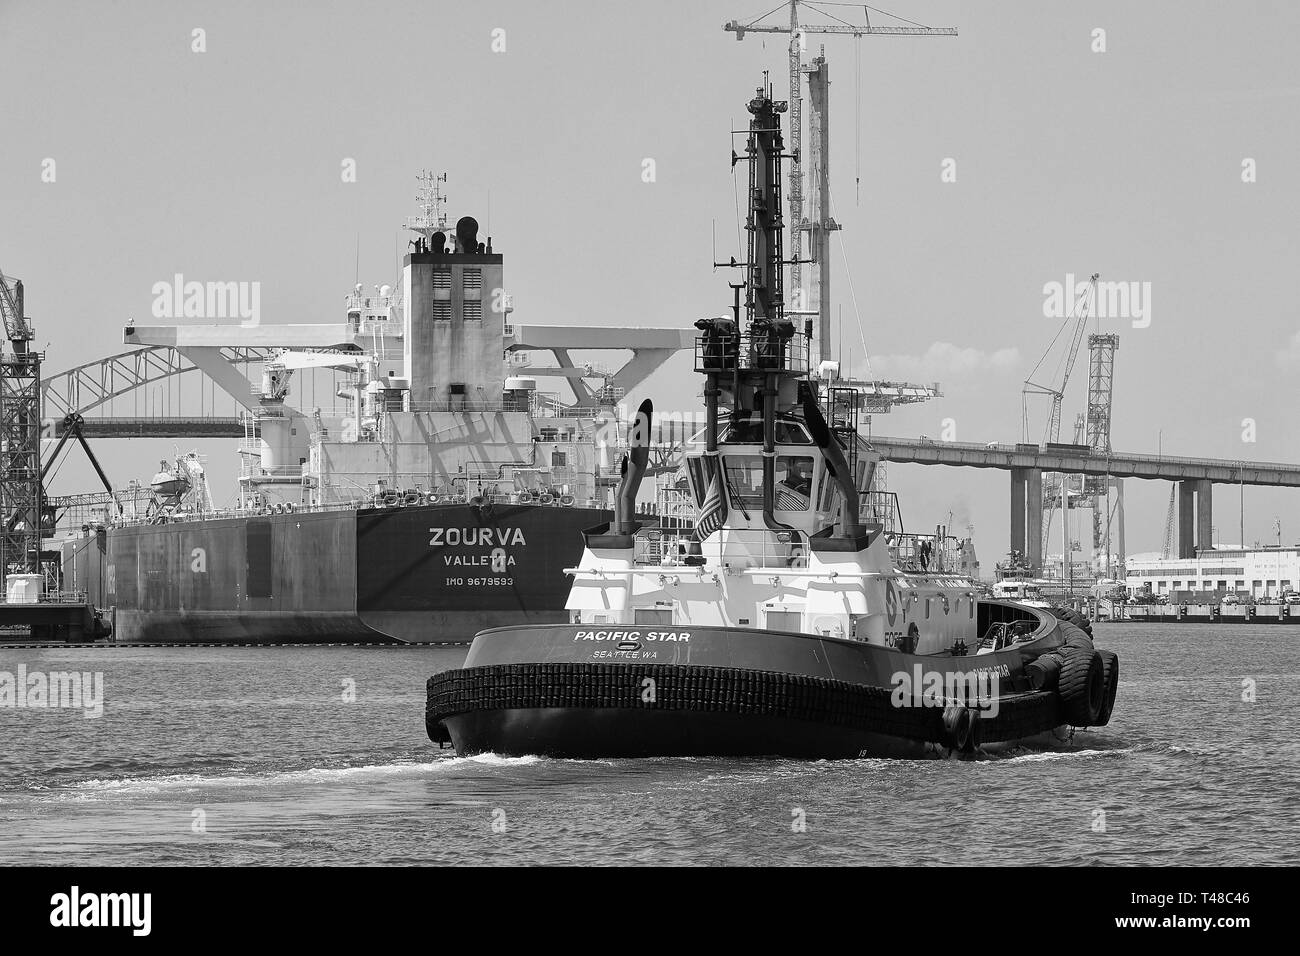 Black And White Photo Of The FOSS MARITIME Tugboat, PACIFIC STAR, In The Port Of Long Beach, California, USA. Stock Photo